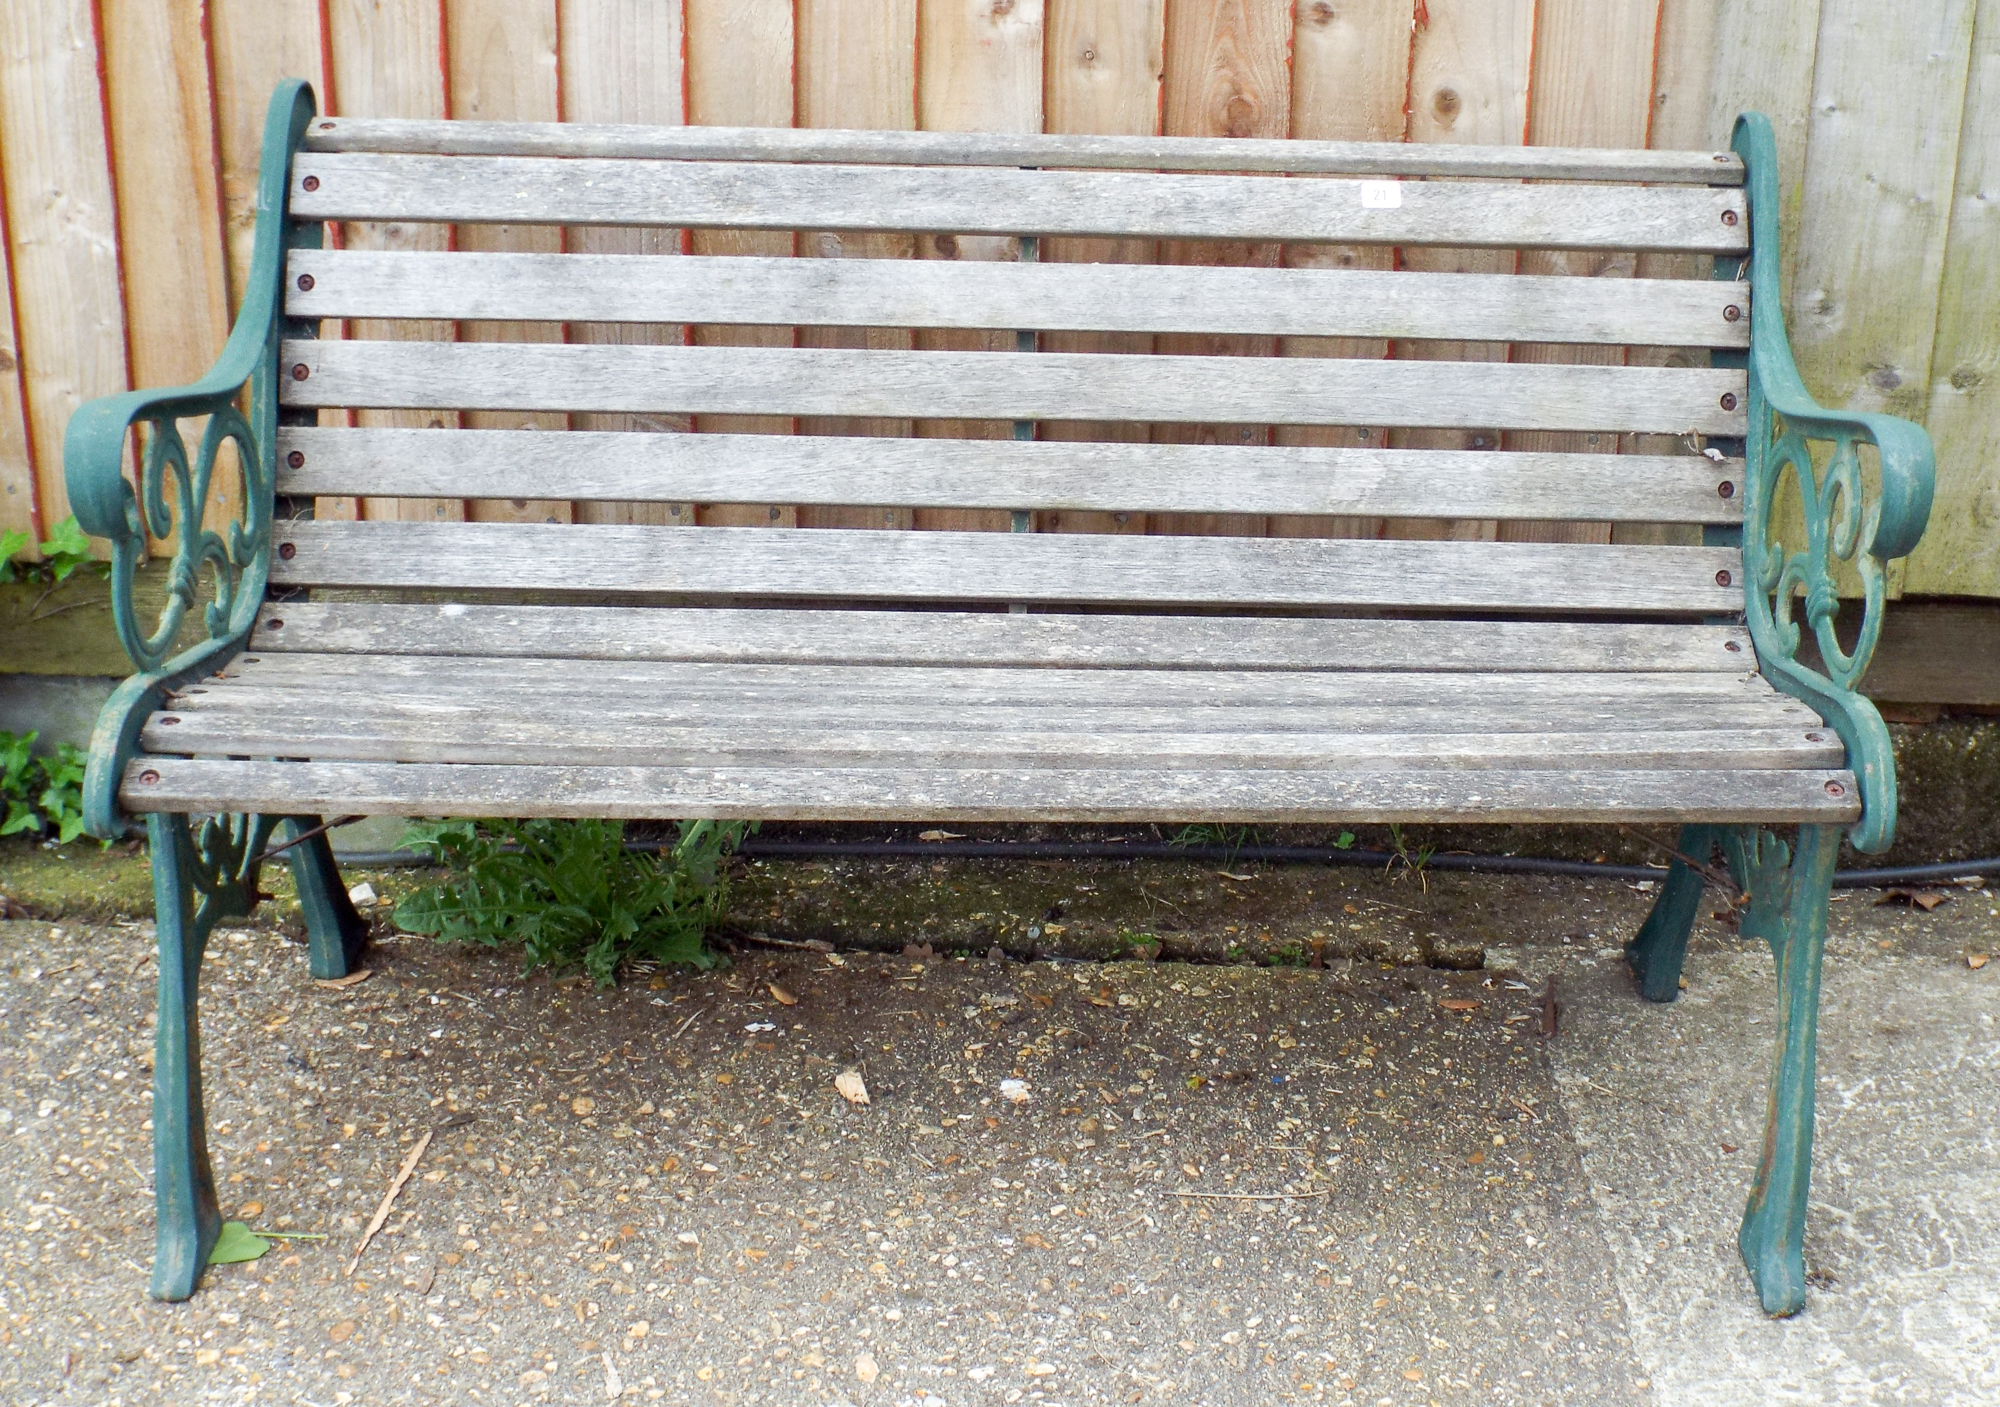 A metal ended wood based garden bench